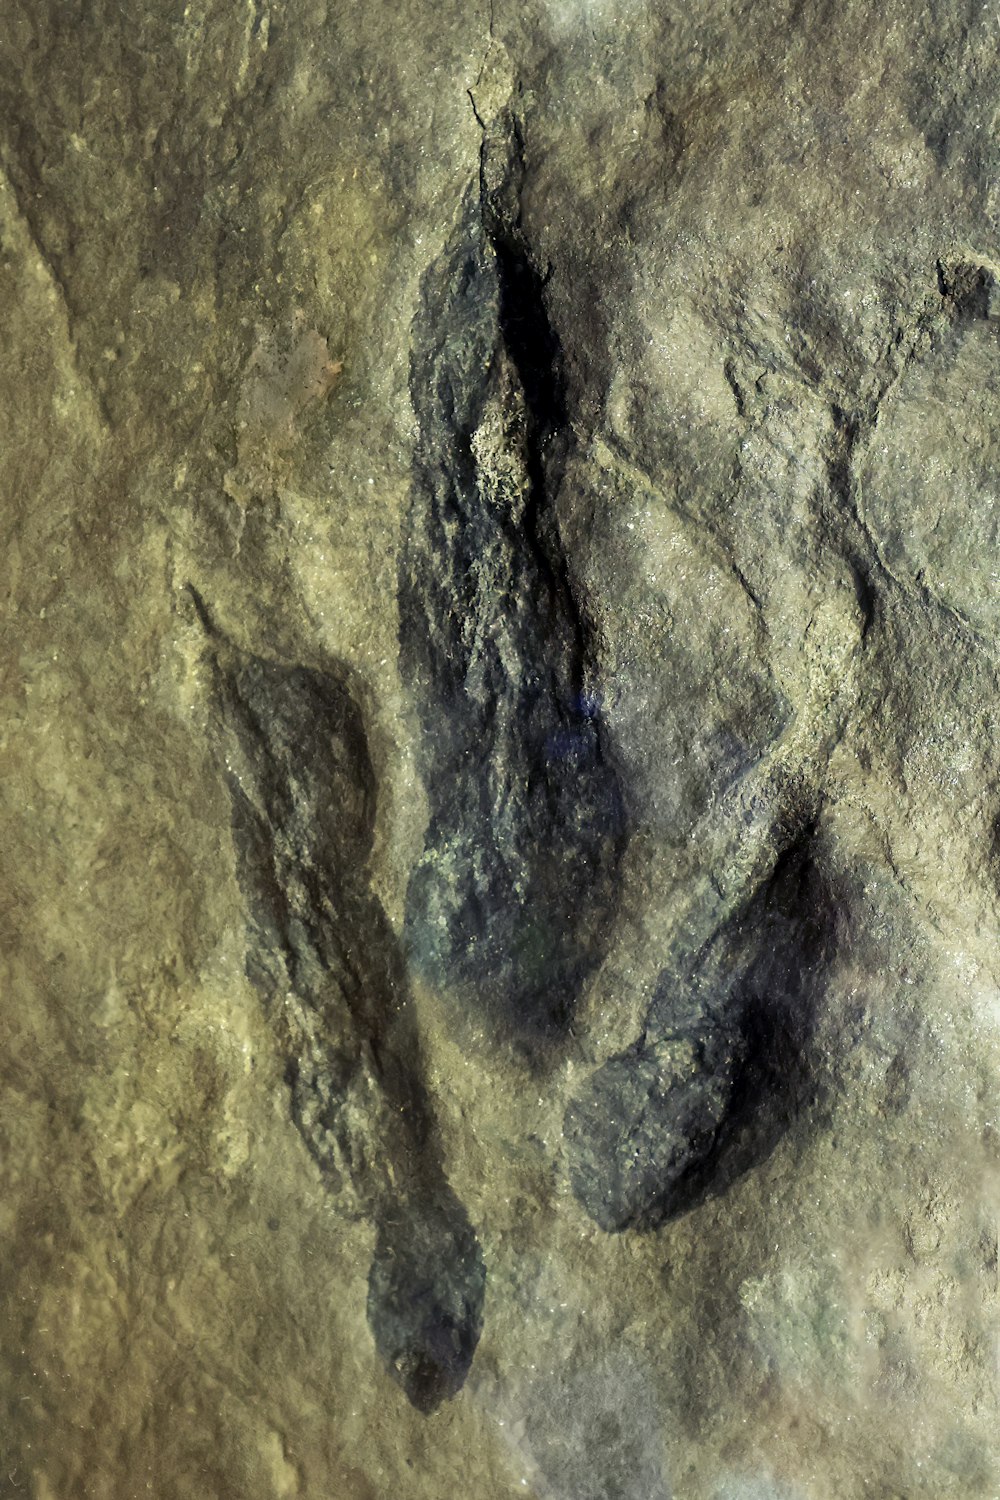 a picture of a rock formation with footprints on it